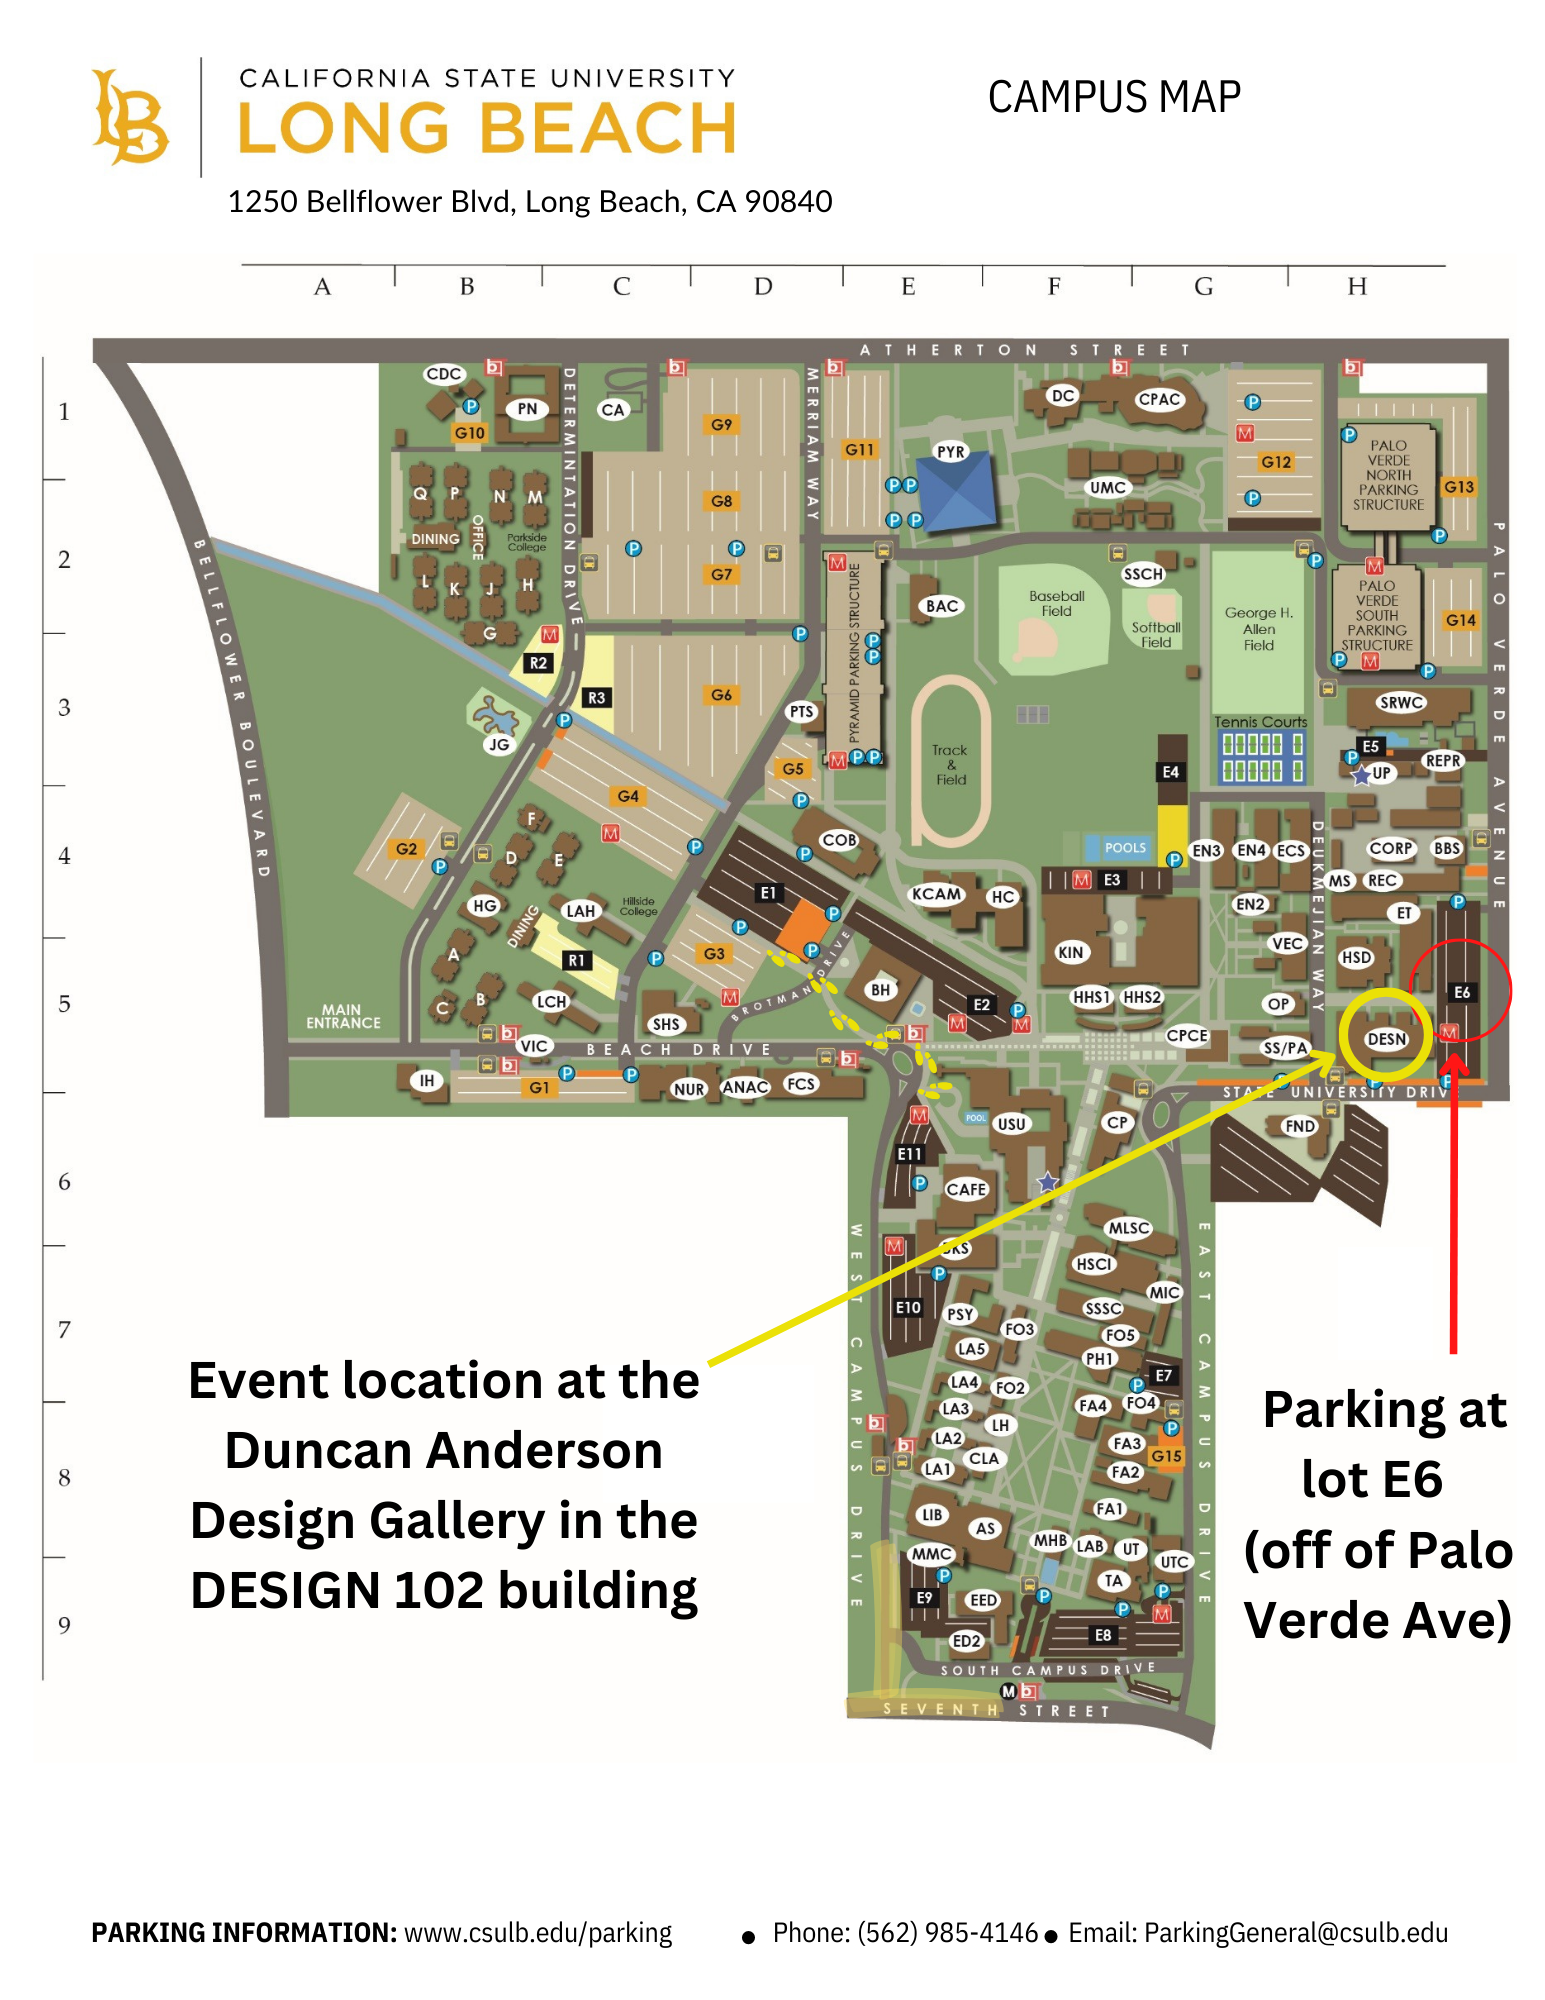 Campus map image showing where the event it and where parking will be. Event is at the Duncan Anderson Design Gallery in the Design building. Parking is in lot E9 off Palo Verde Ave